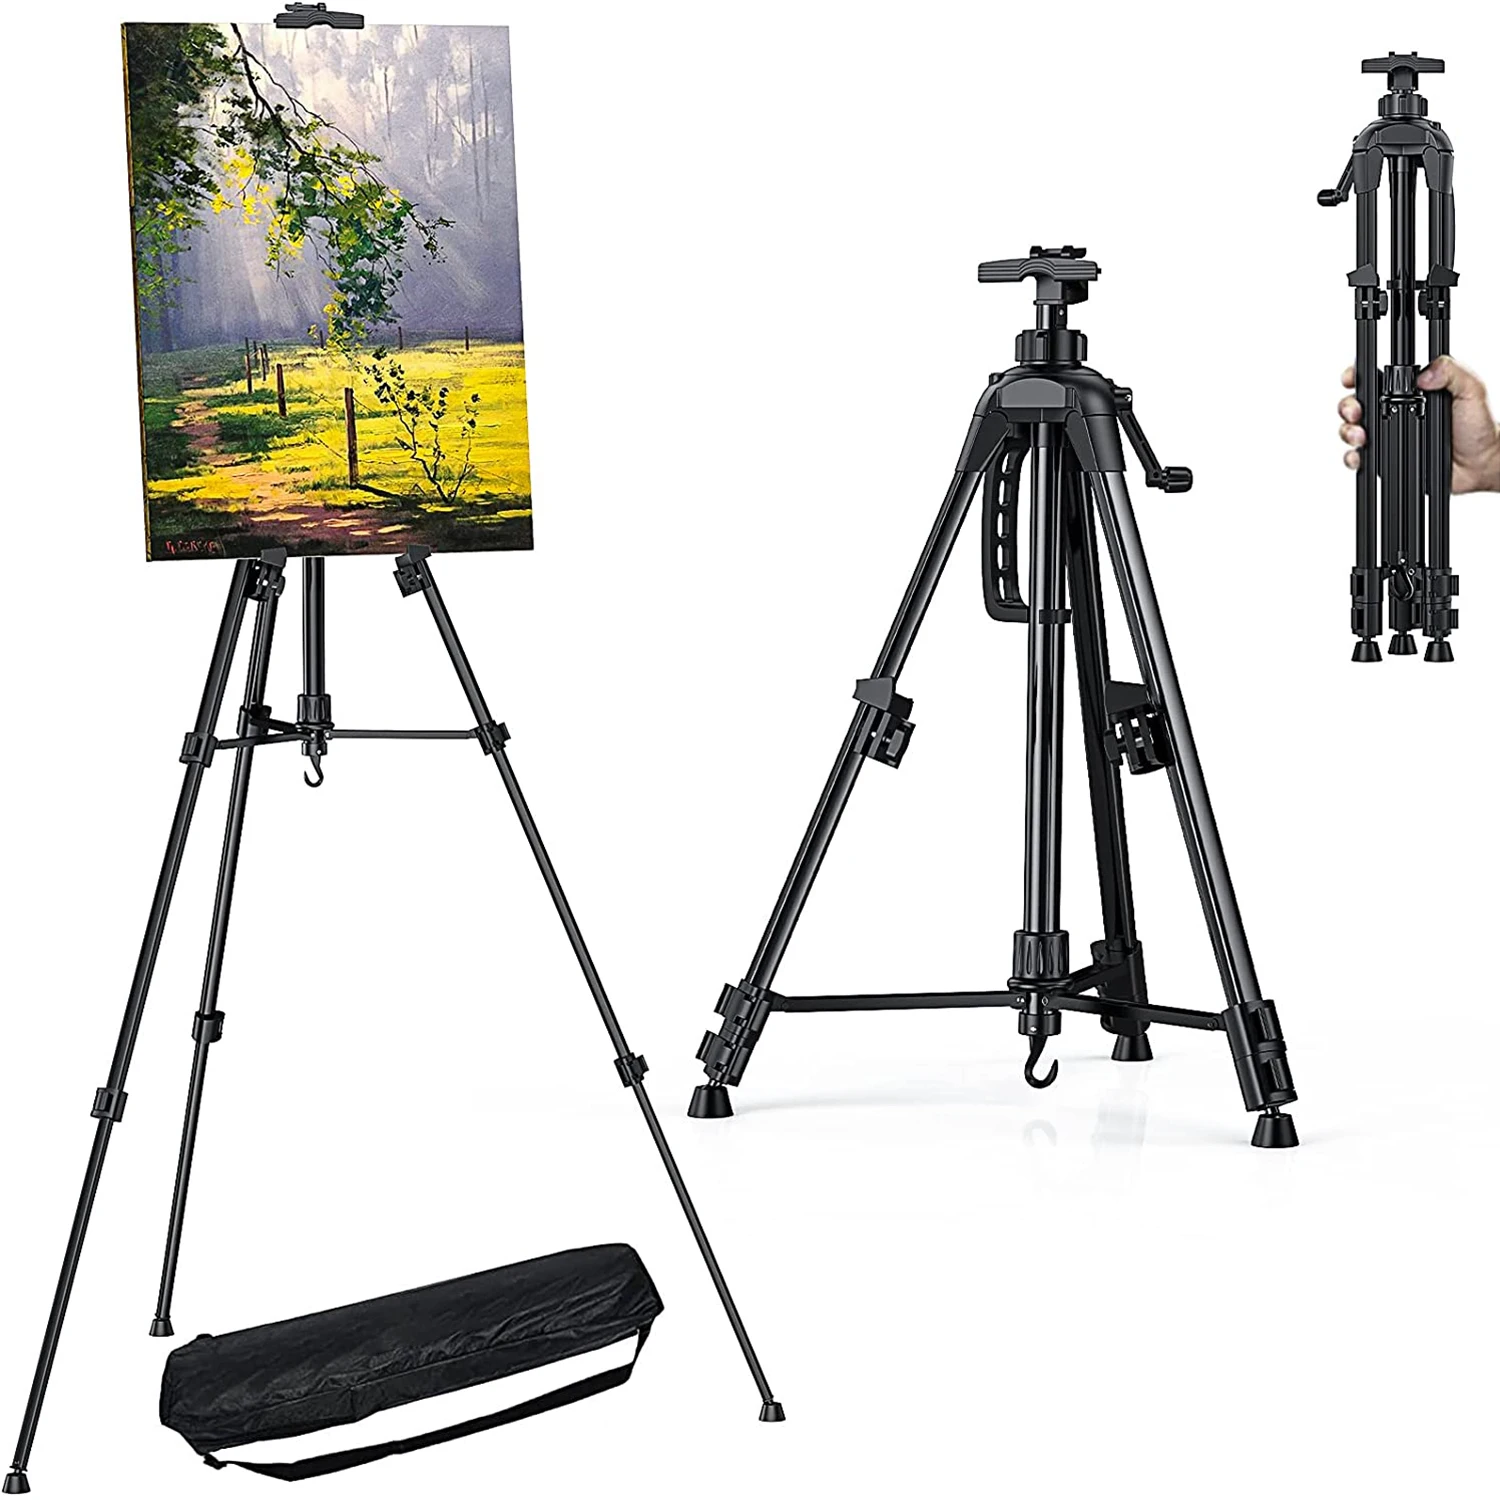 

60 Inch Lightweight Aluminum Easel Stand Adjustable Art Easel Portable Stand Up Drawing Easels Standing for Painting 60"